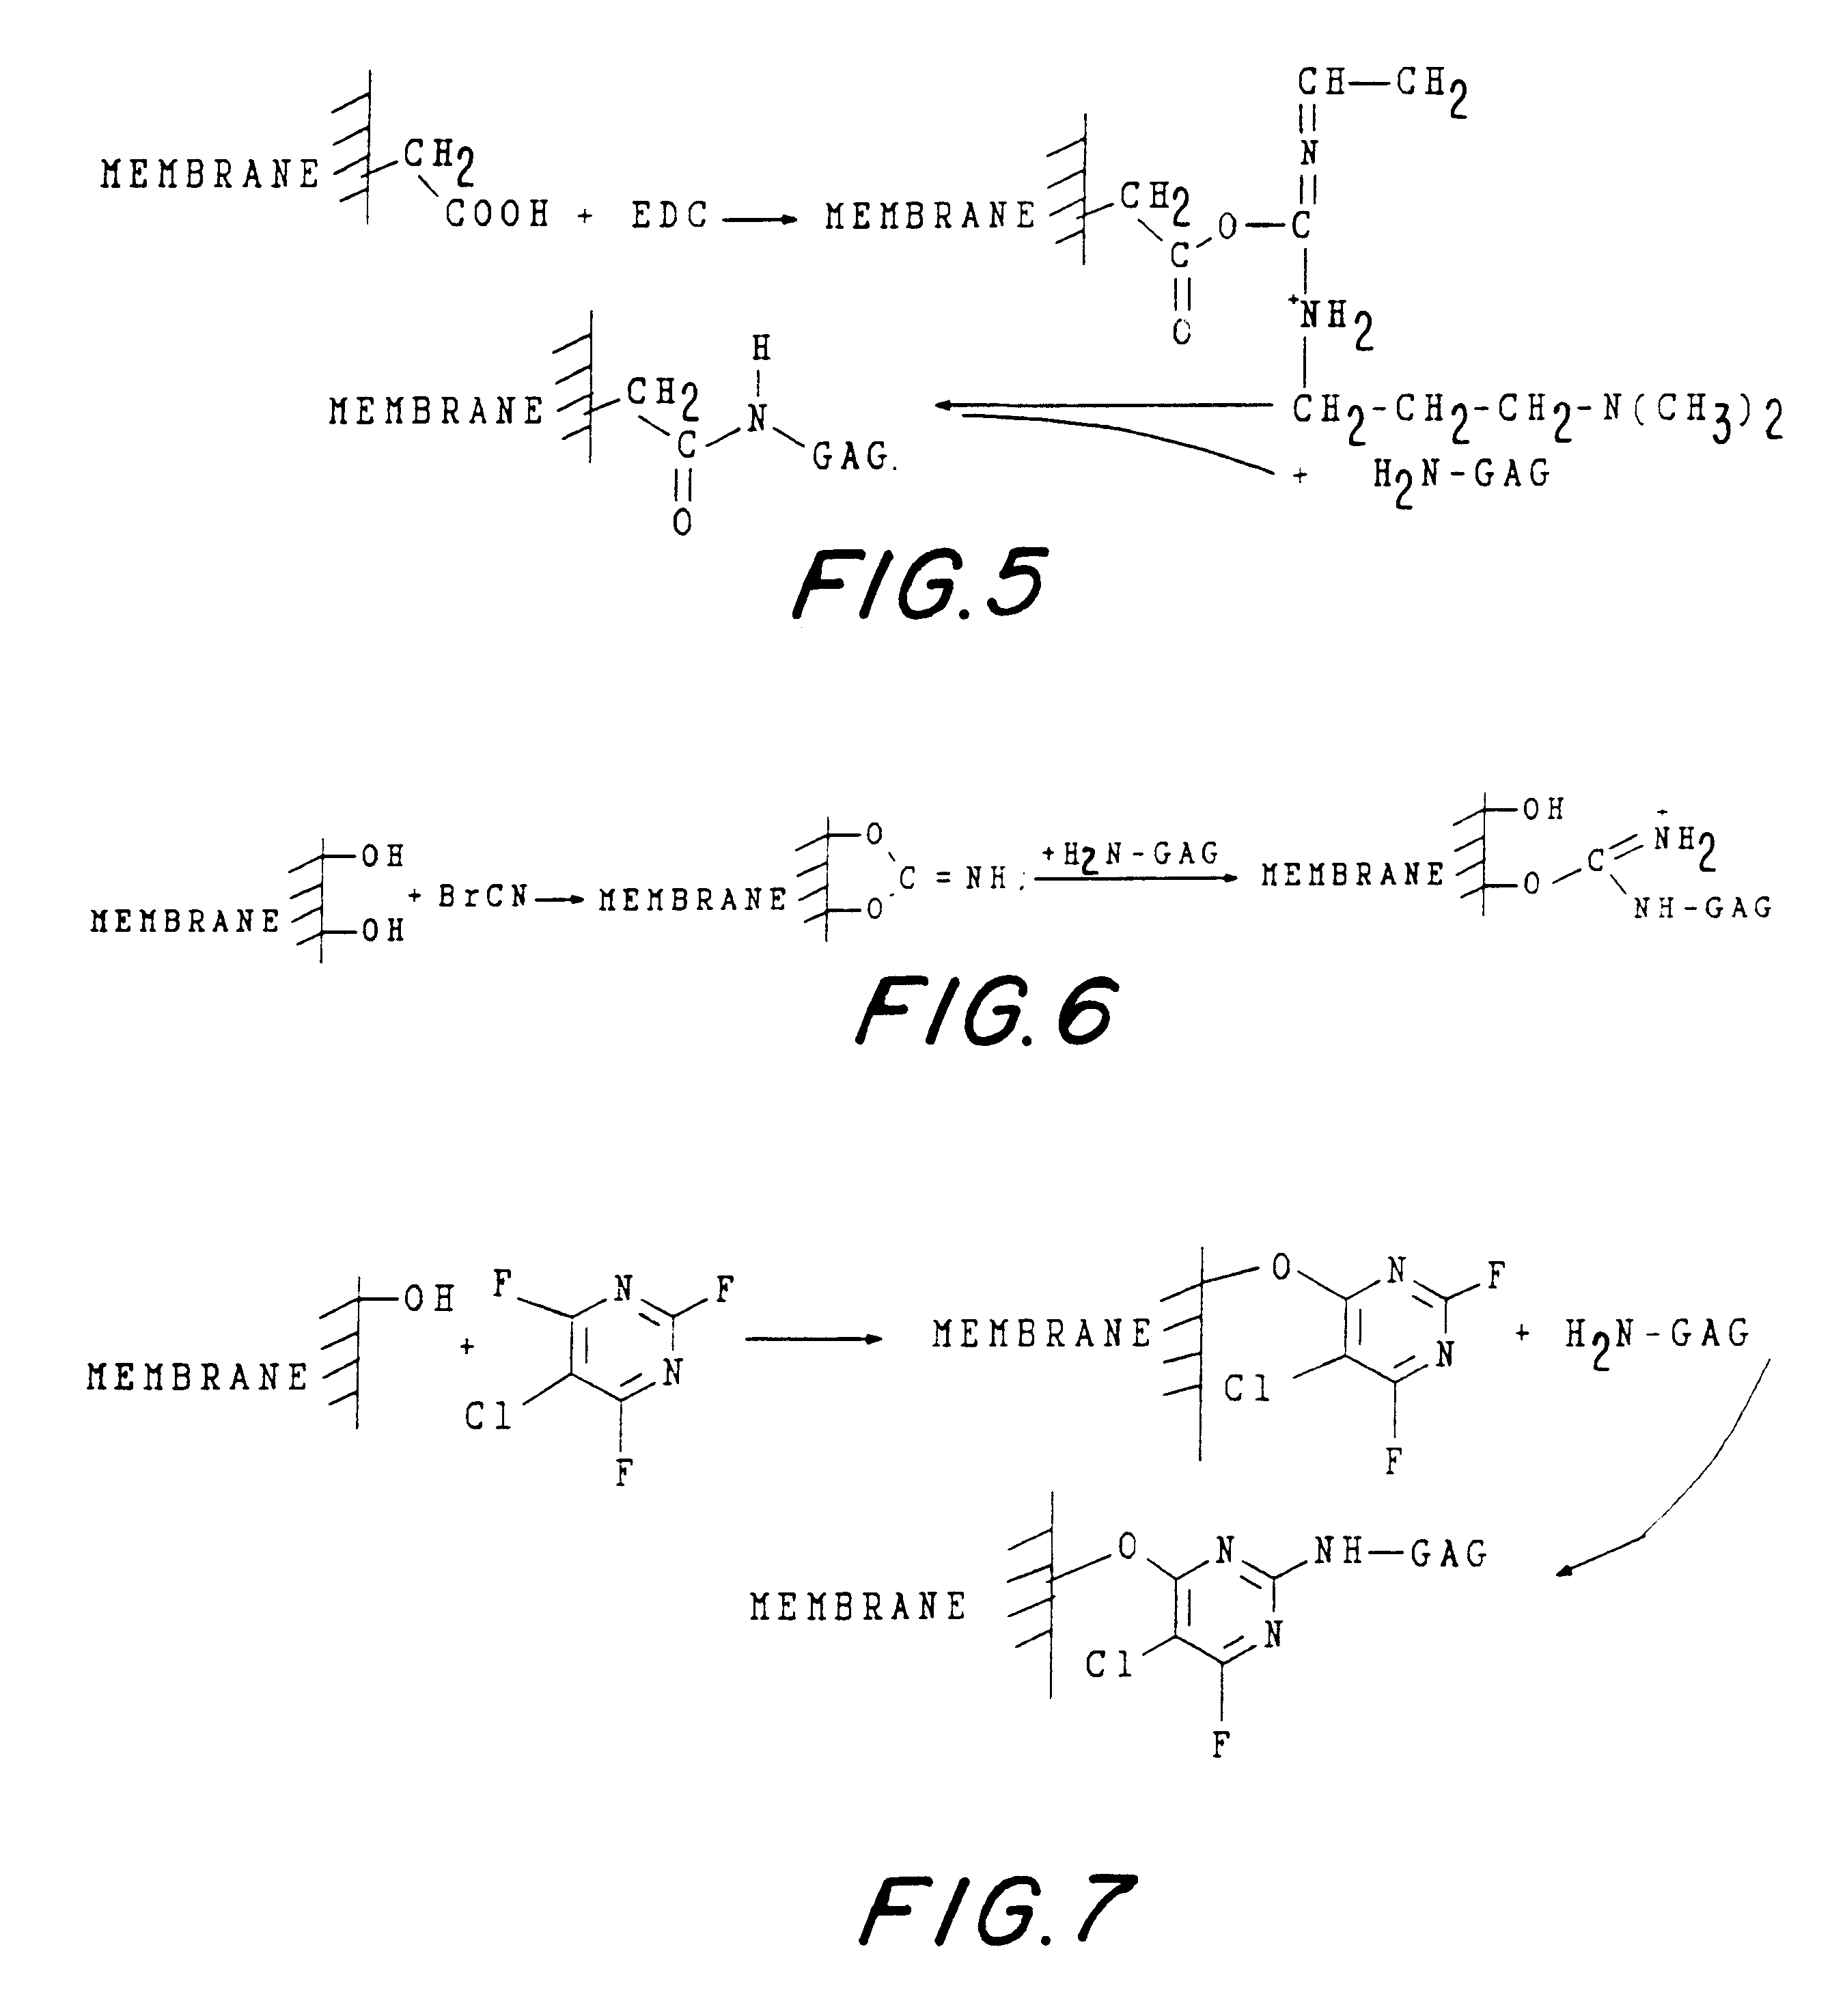 Non-immunogenic, biocompatible macromolecular membrane compositions, and methods for making them